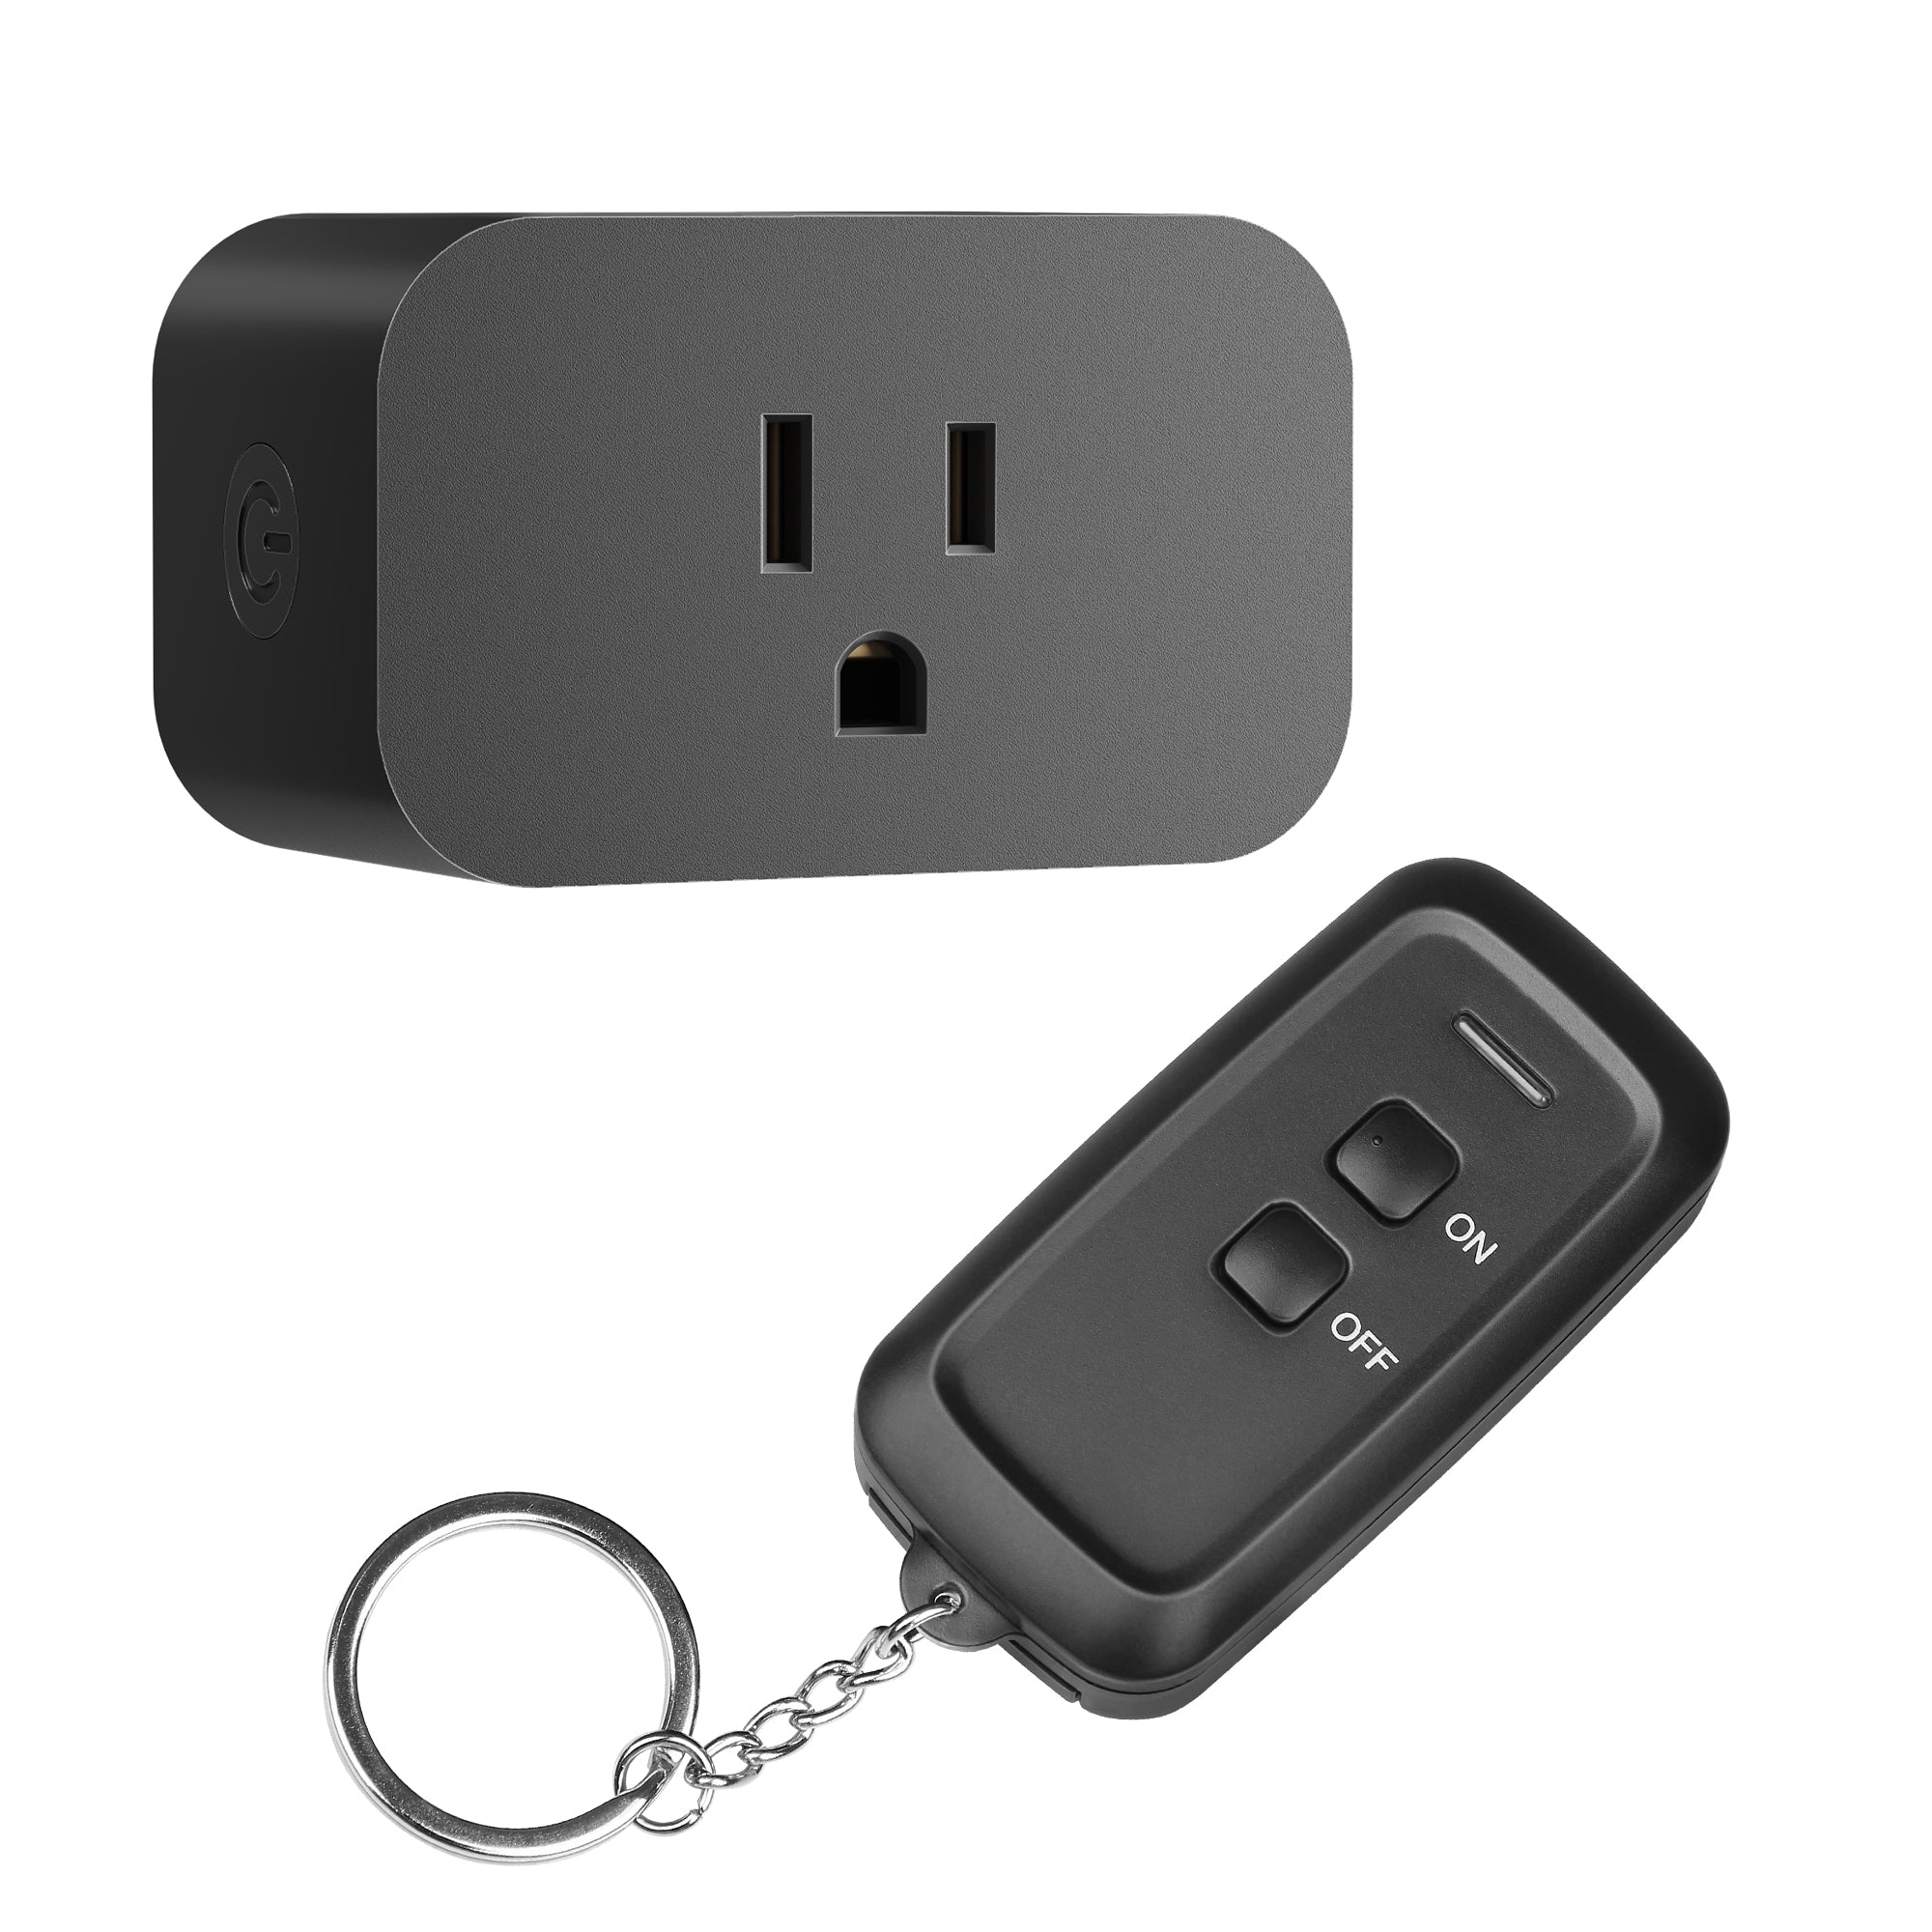 DEWENWILS Indoor Remote Control Outlet, Wireless Remote Light